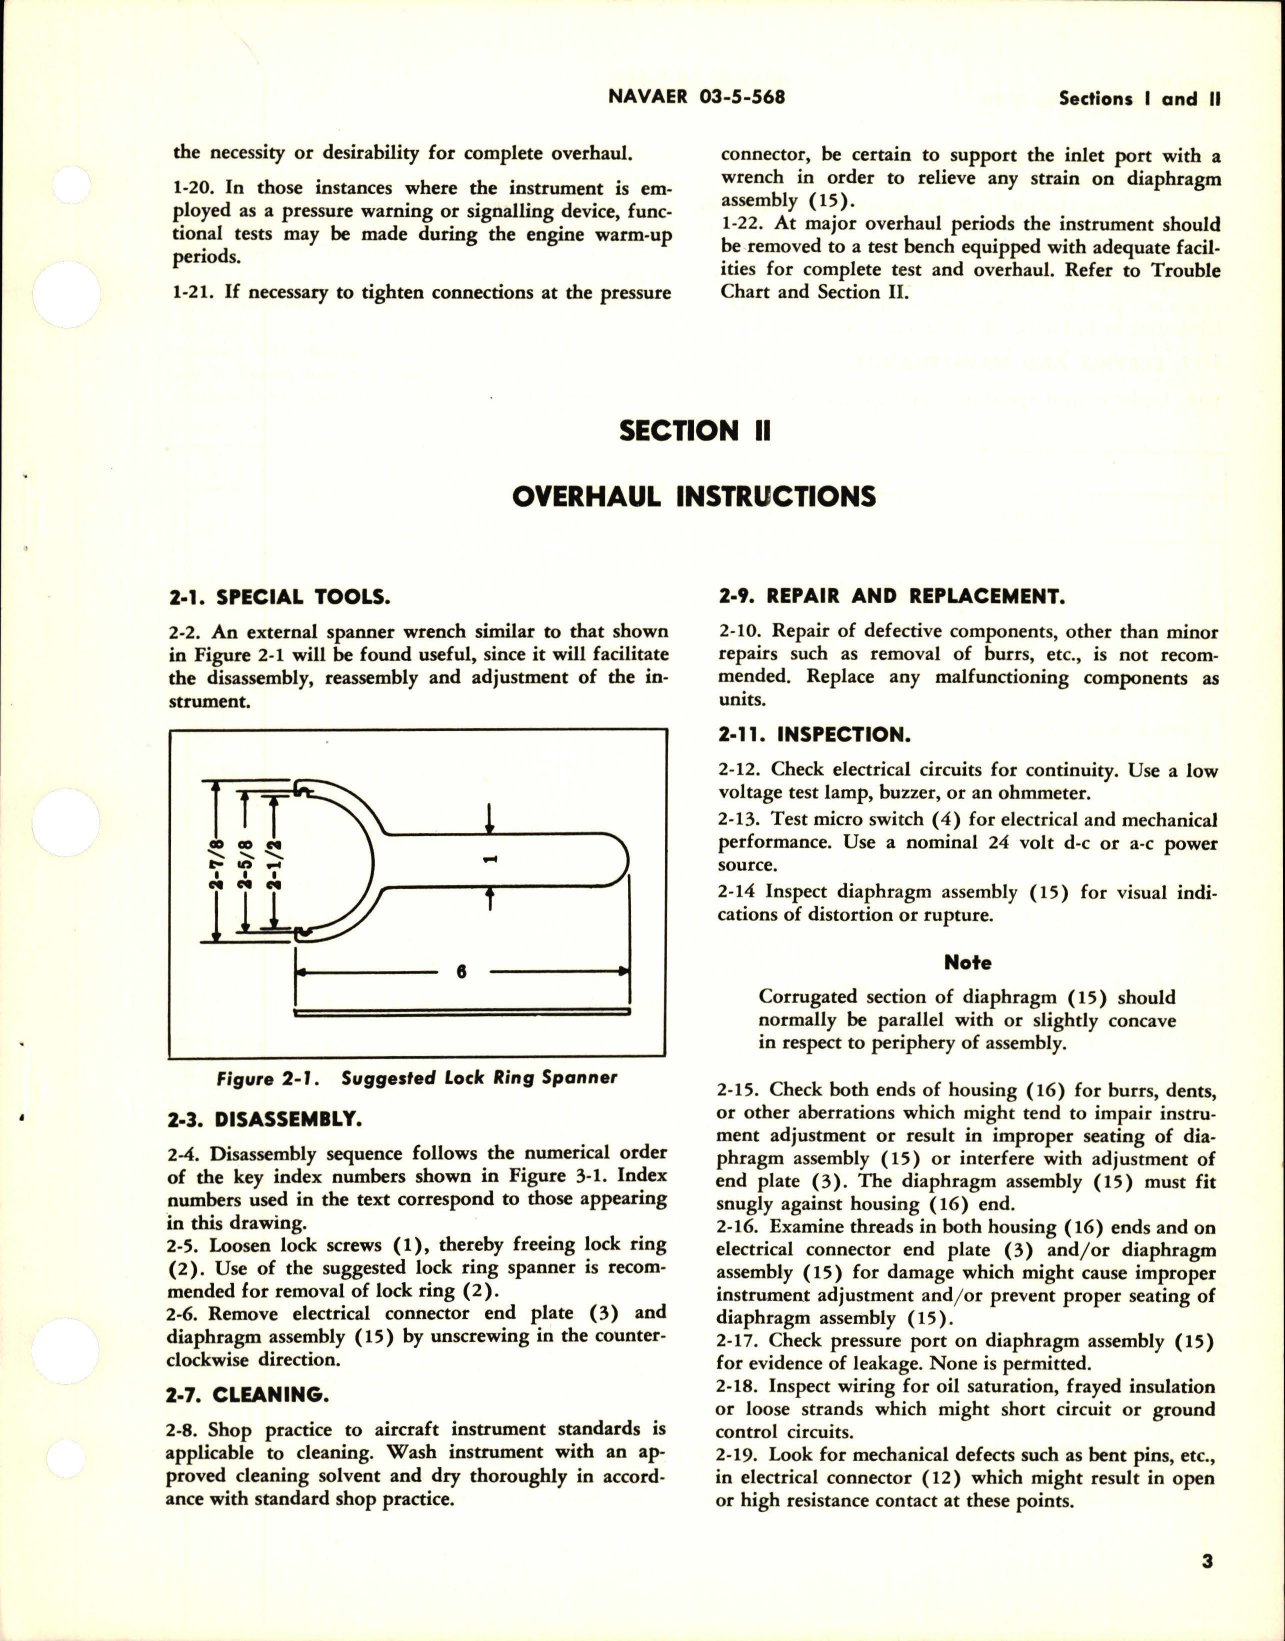 Sample page 5 from AirCorps Library document: Operation, Service & Overhaul Instructions w Parts Breakdown for Pressure Actuated Switch - Model 410-16-119 